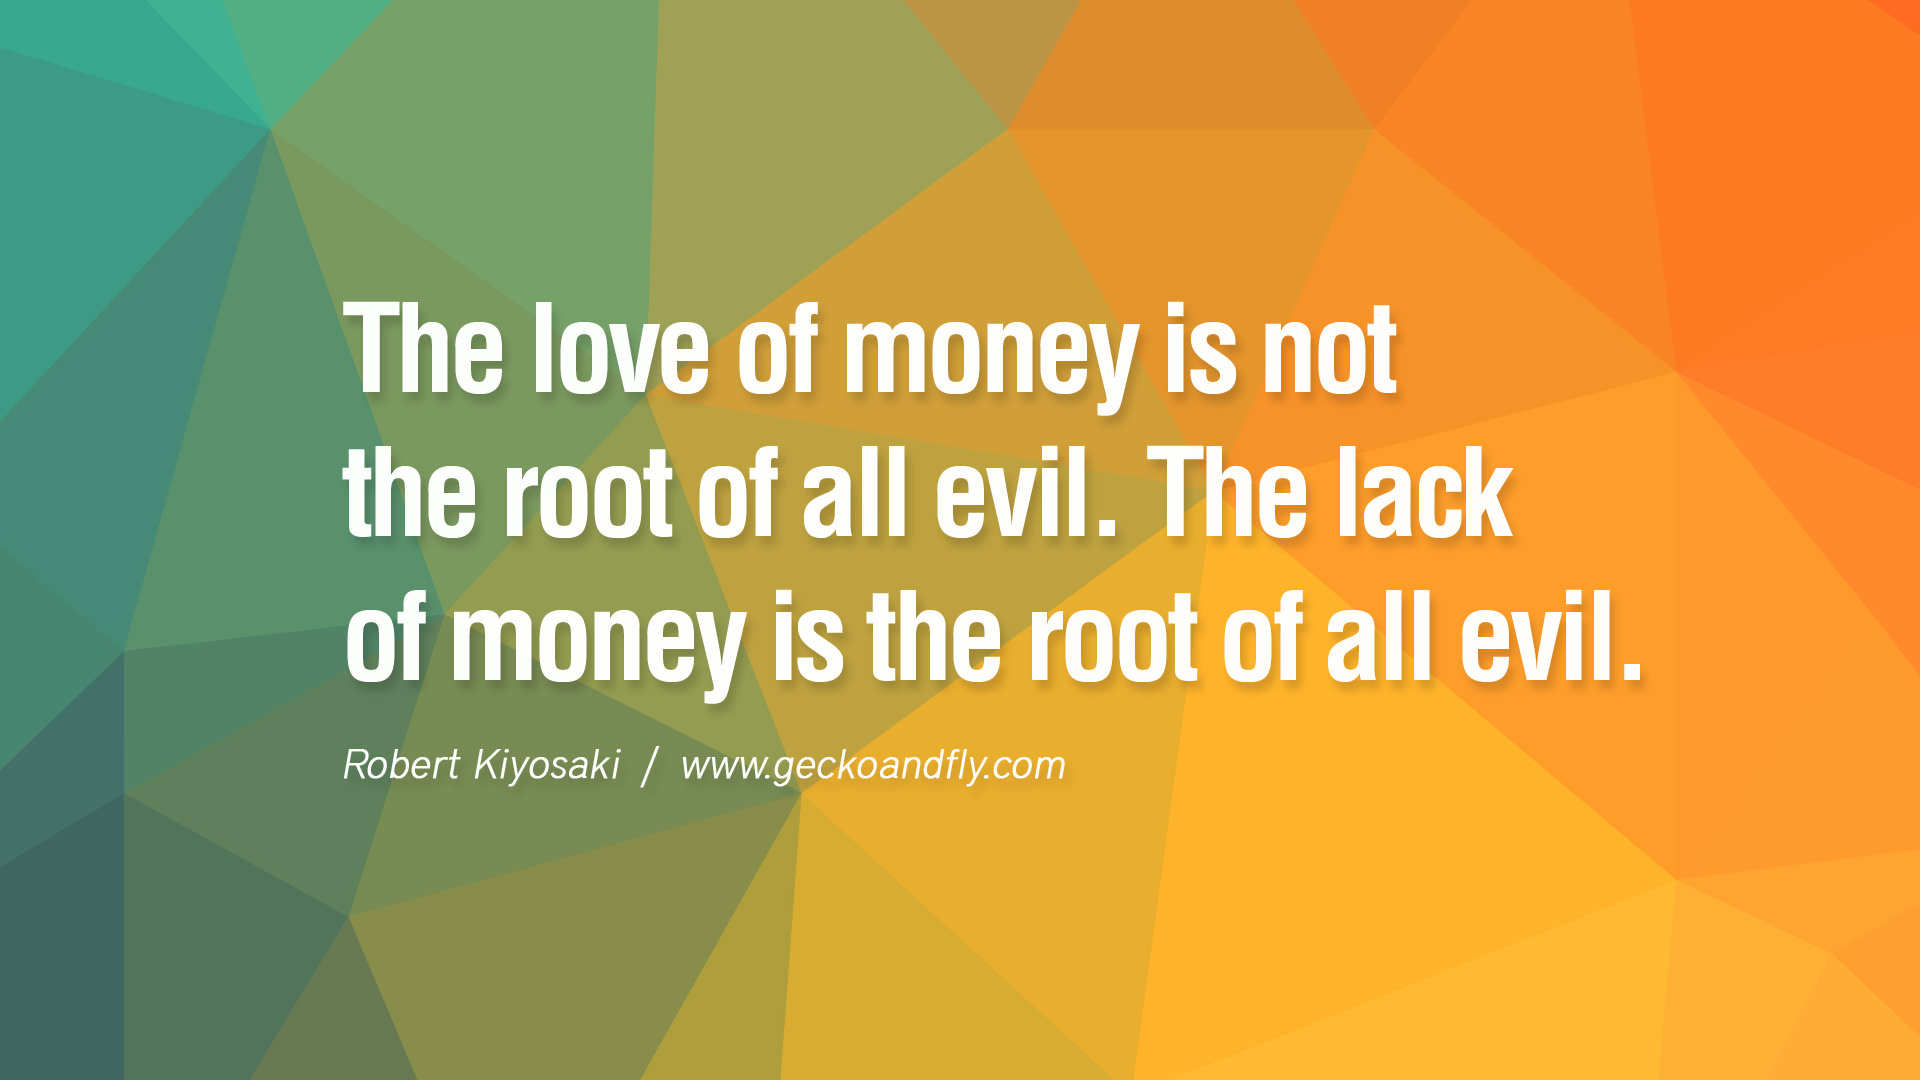 Money Quotes About Not Being Everything. QuotesGram